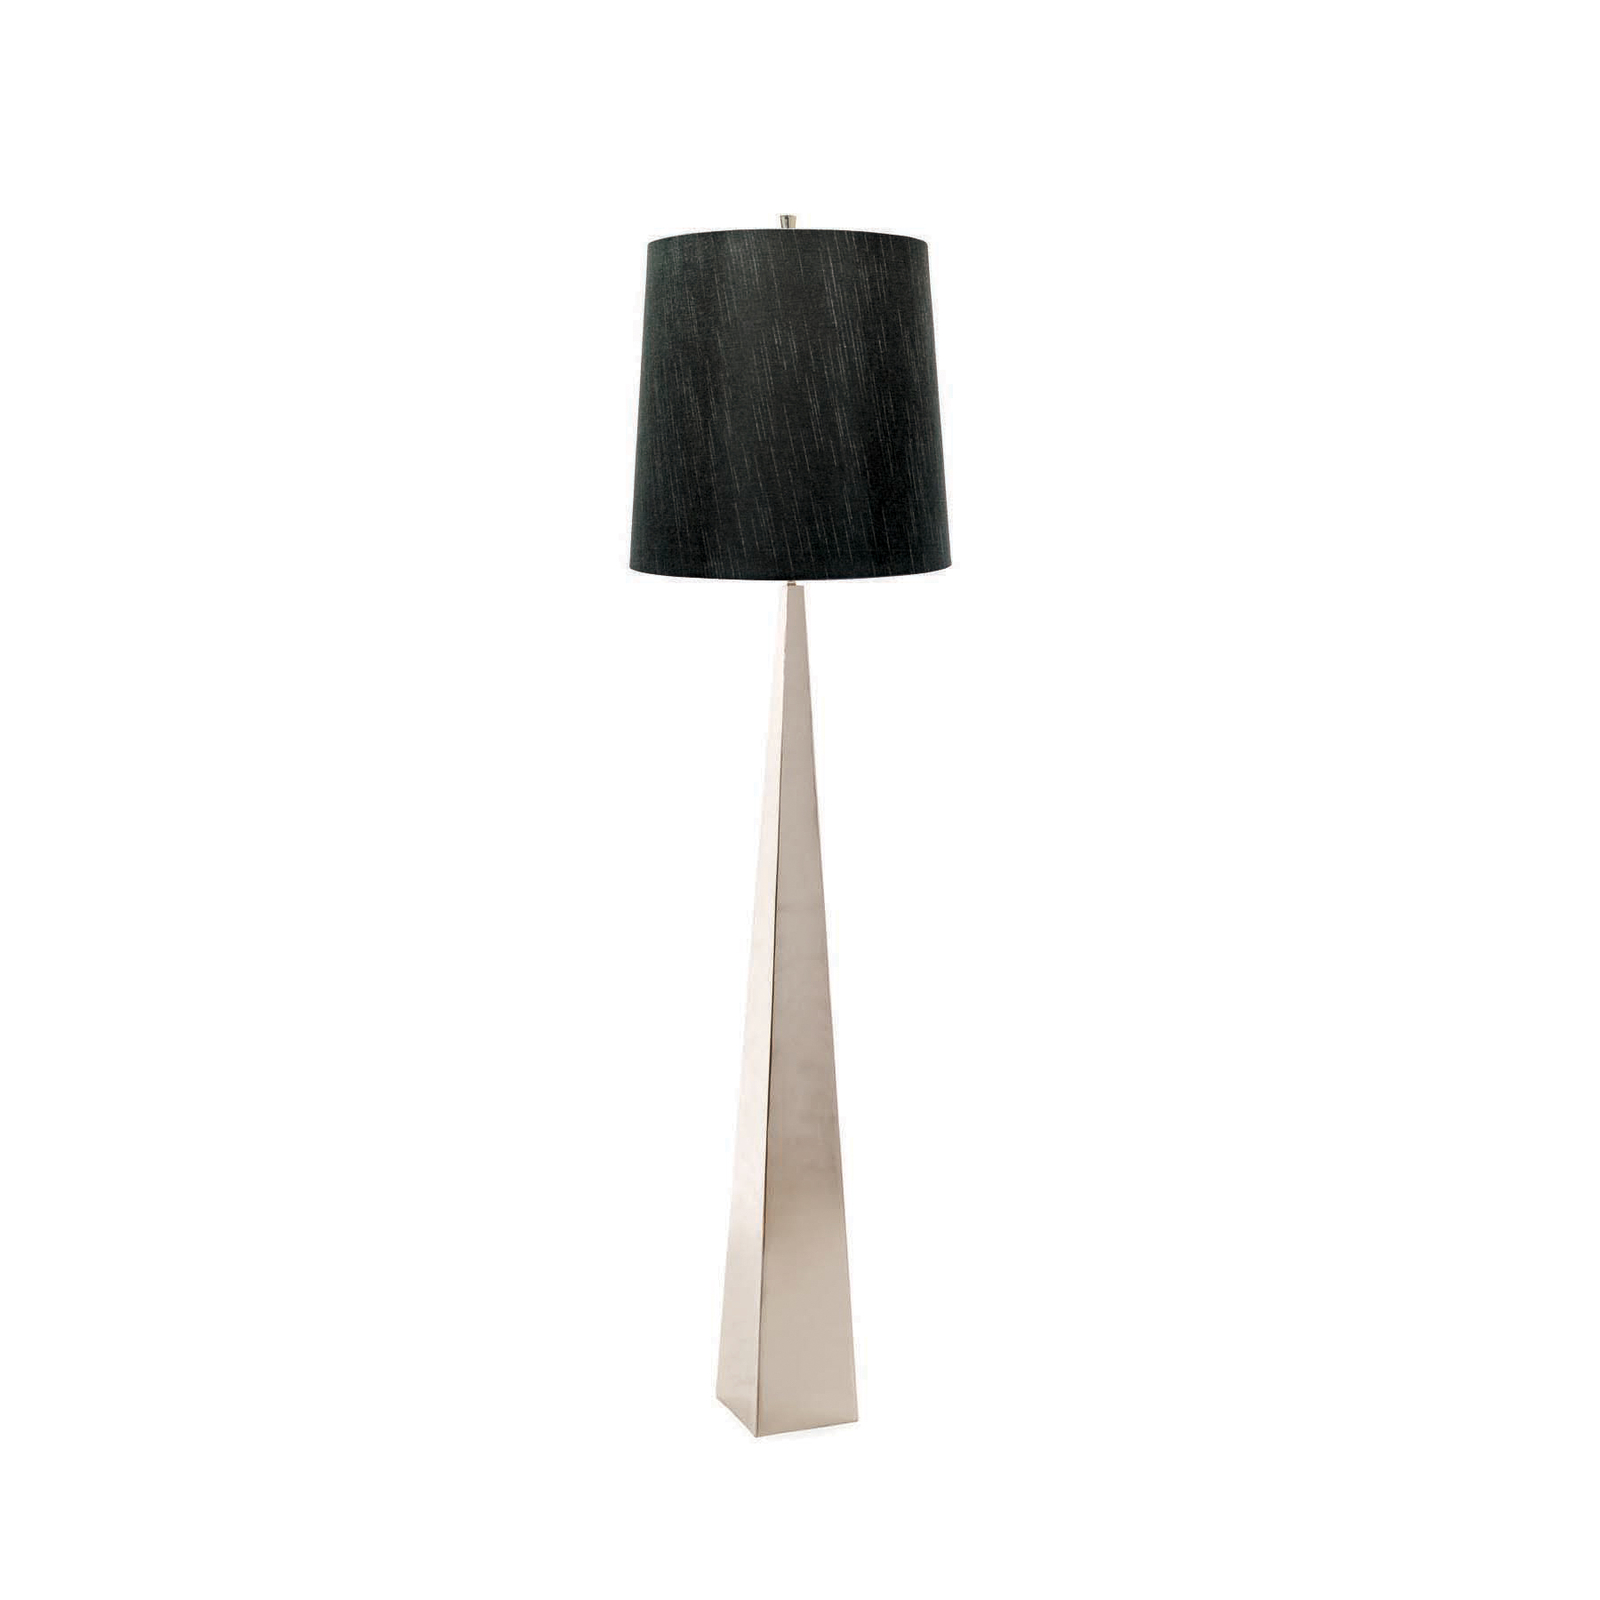 Ascent floor lamp, polished nickel, black lampshade